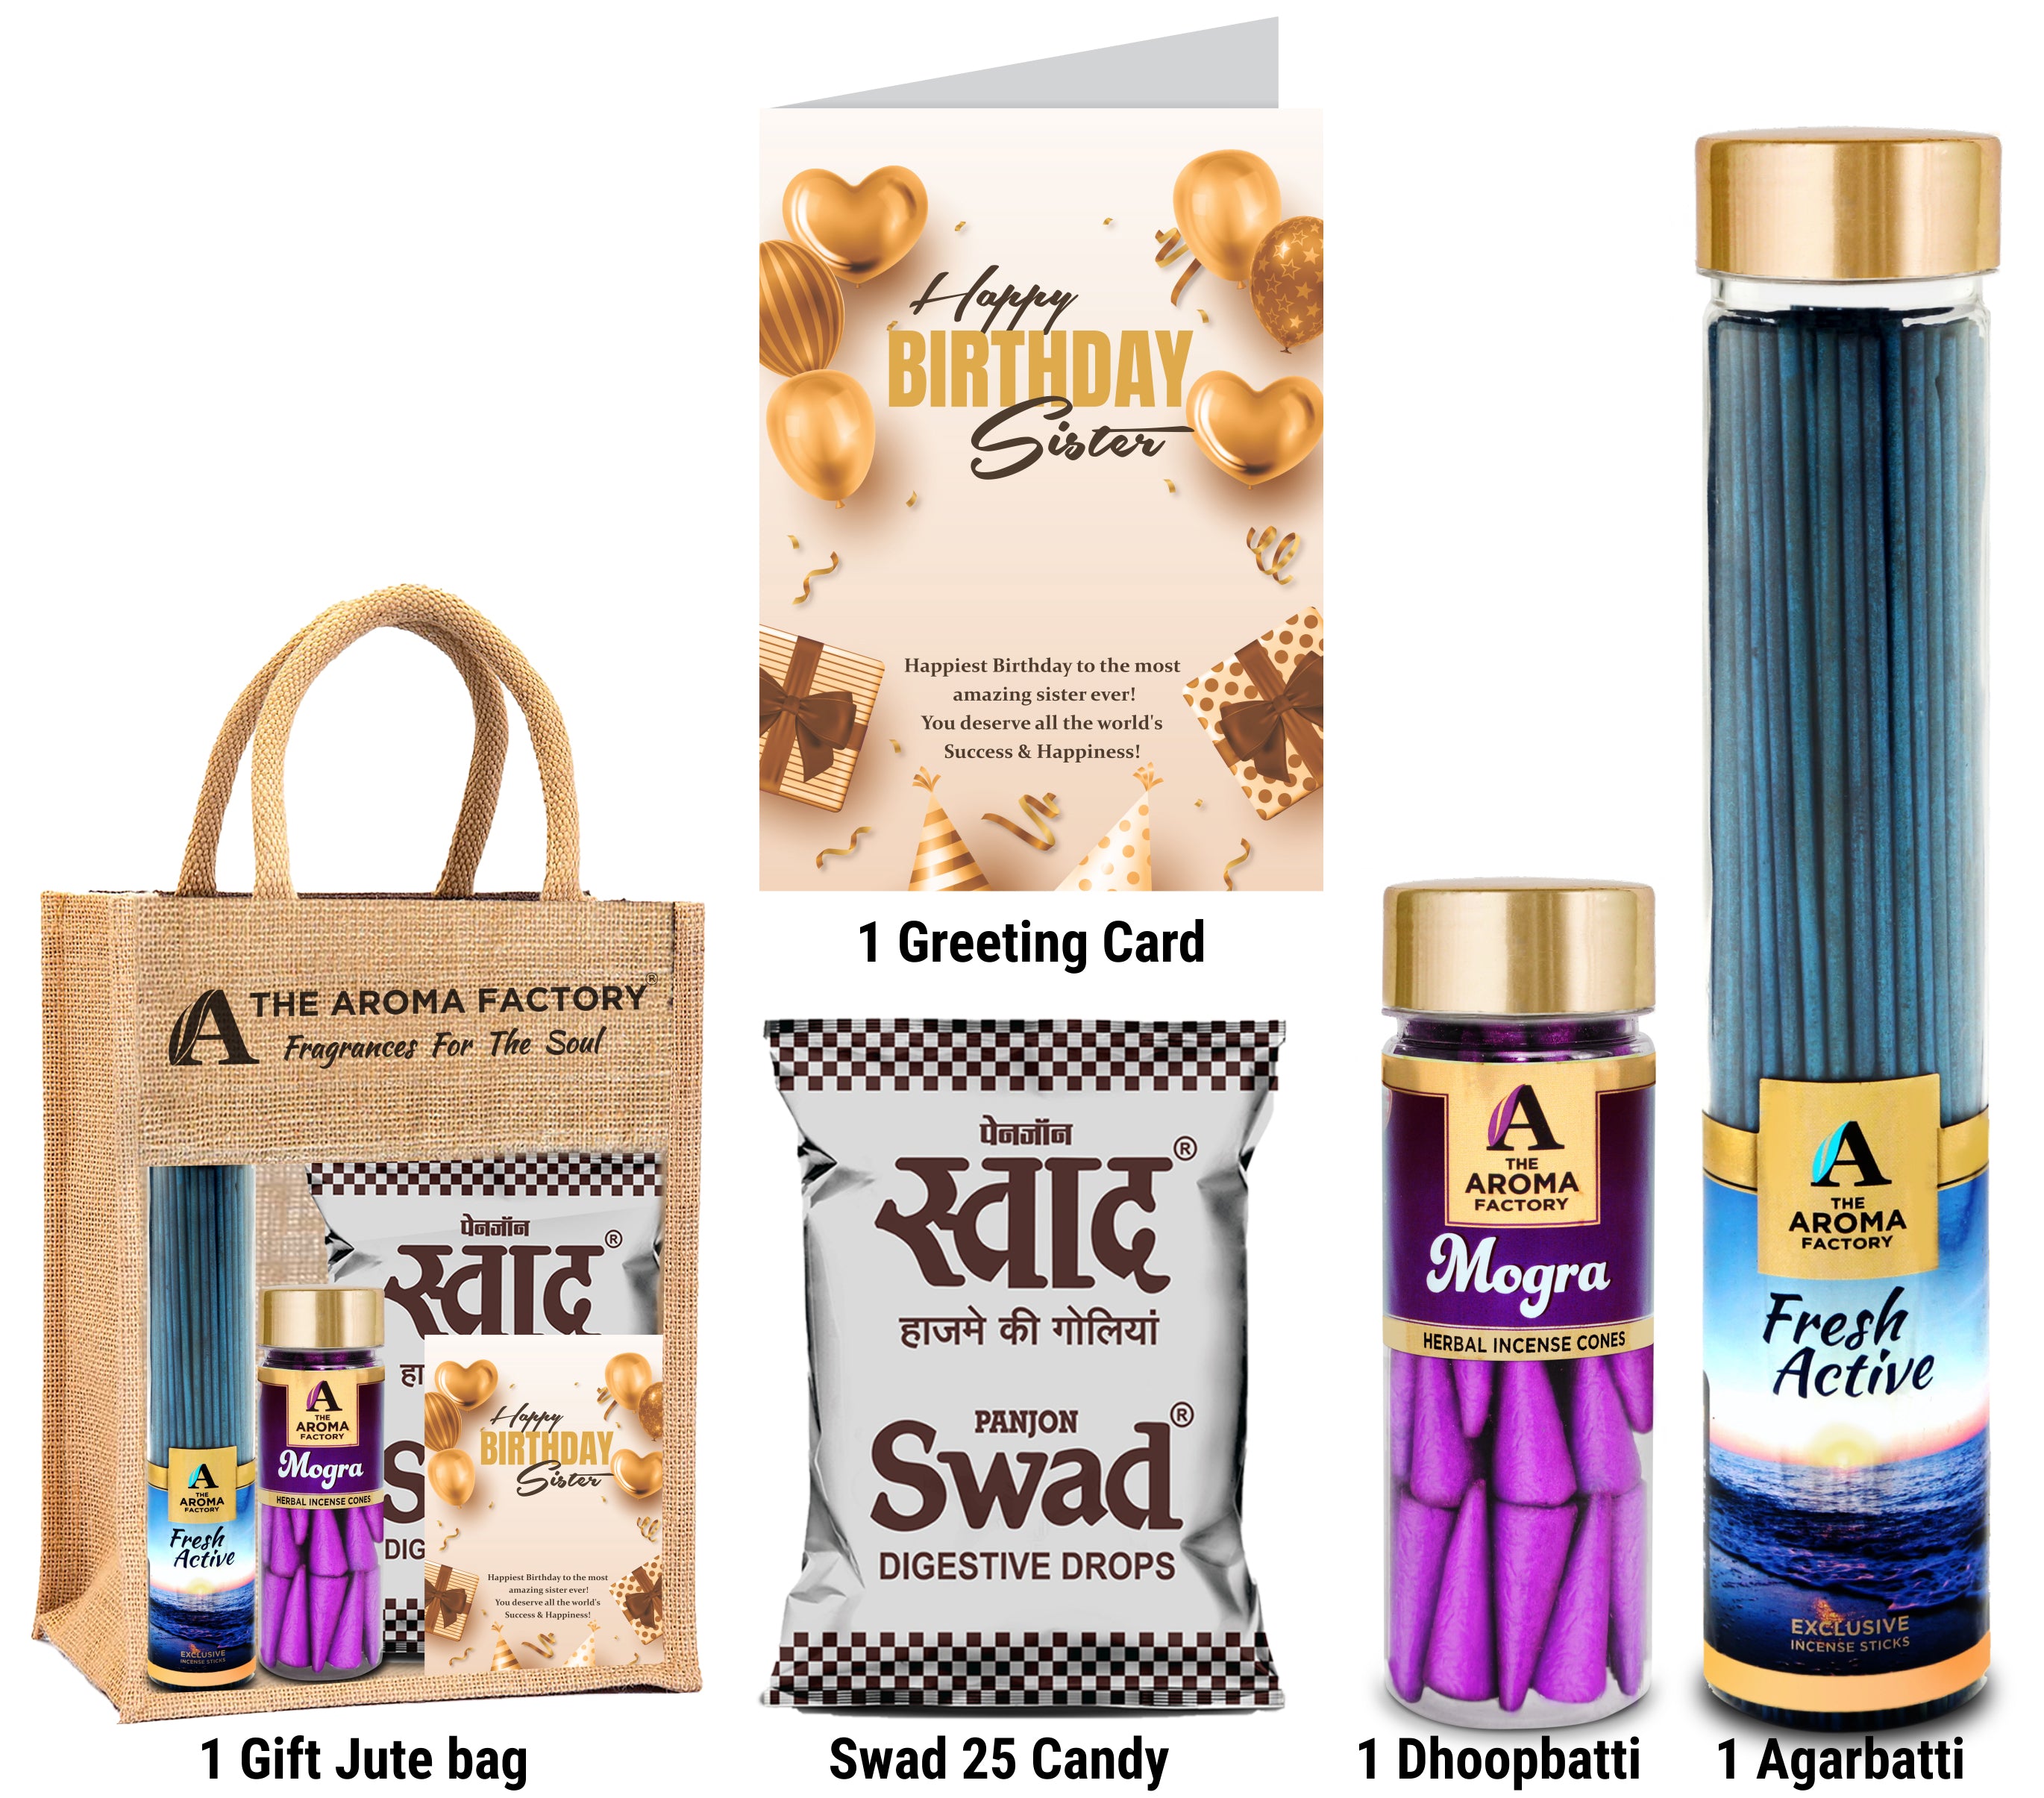 The Aroma Factory Happy Birthday Sister Gift with Card (25 Swad Candy, Fresh Active Agarbatti Bottle, Jasmine Cone) in Jute Bag